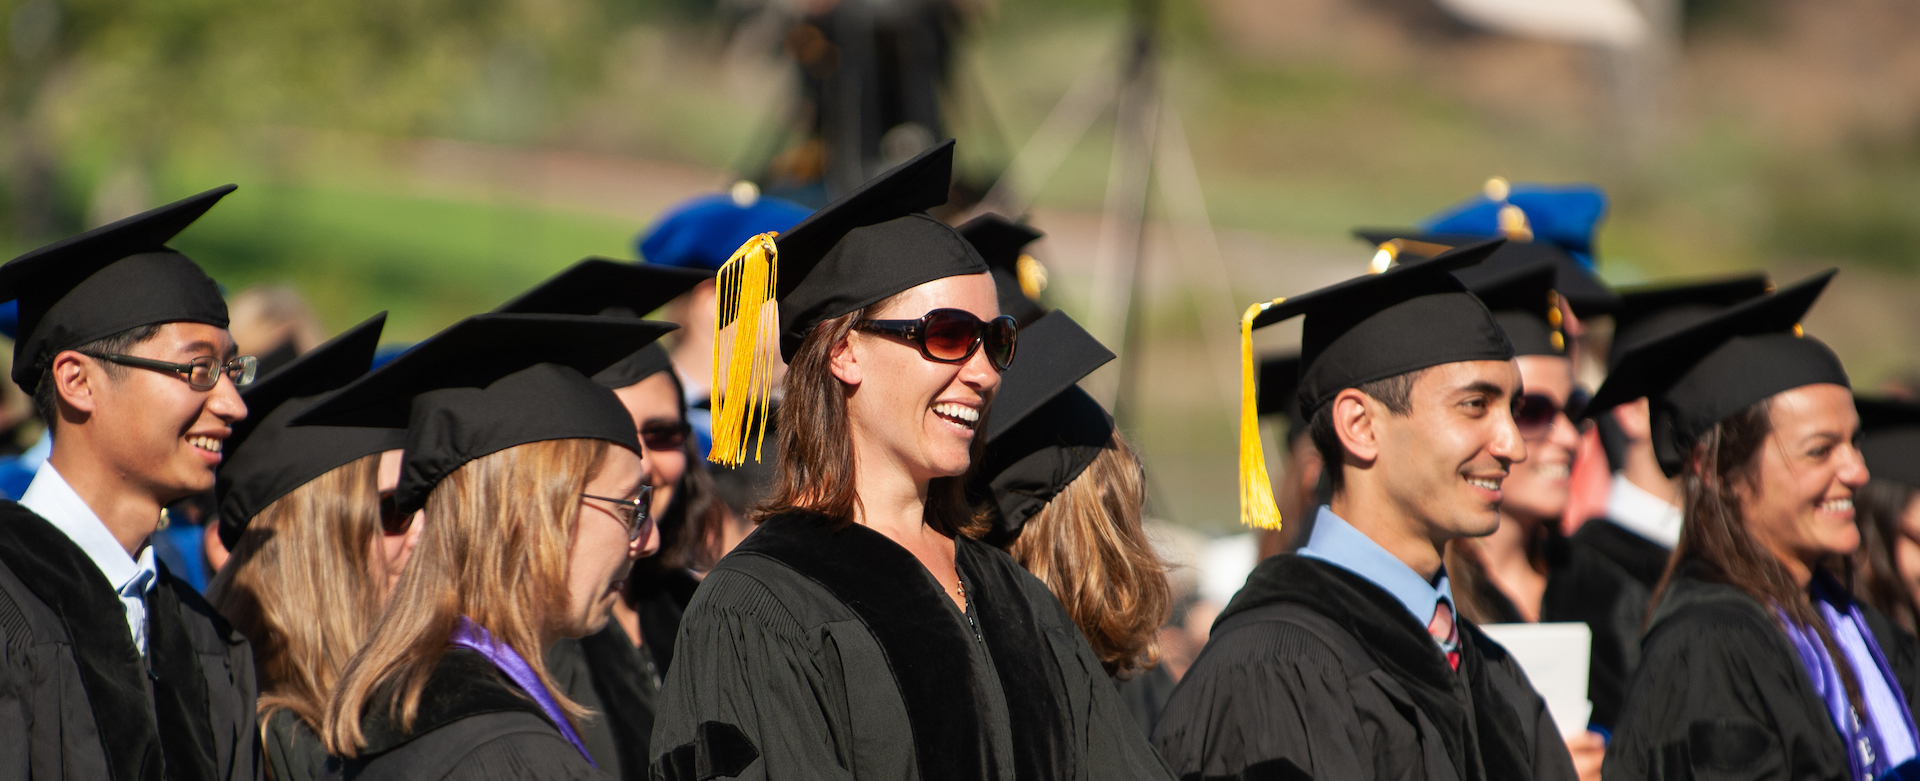 Graduate students standing at commencement with graduation robes and caps